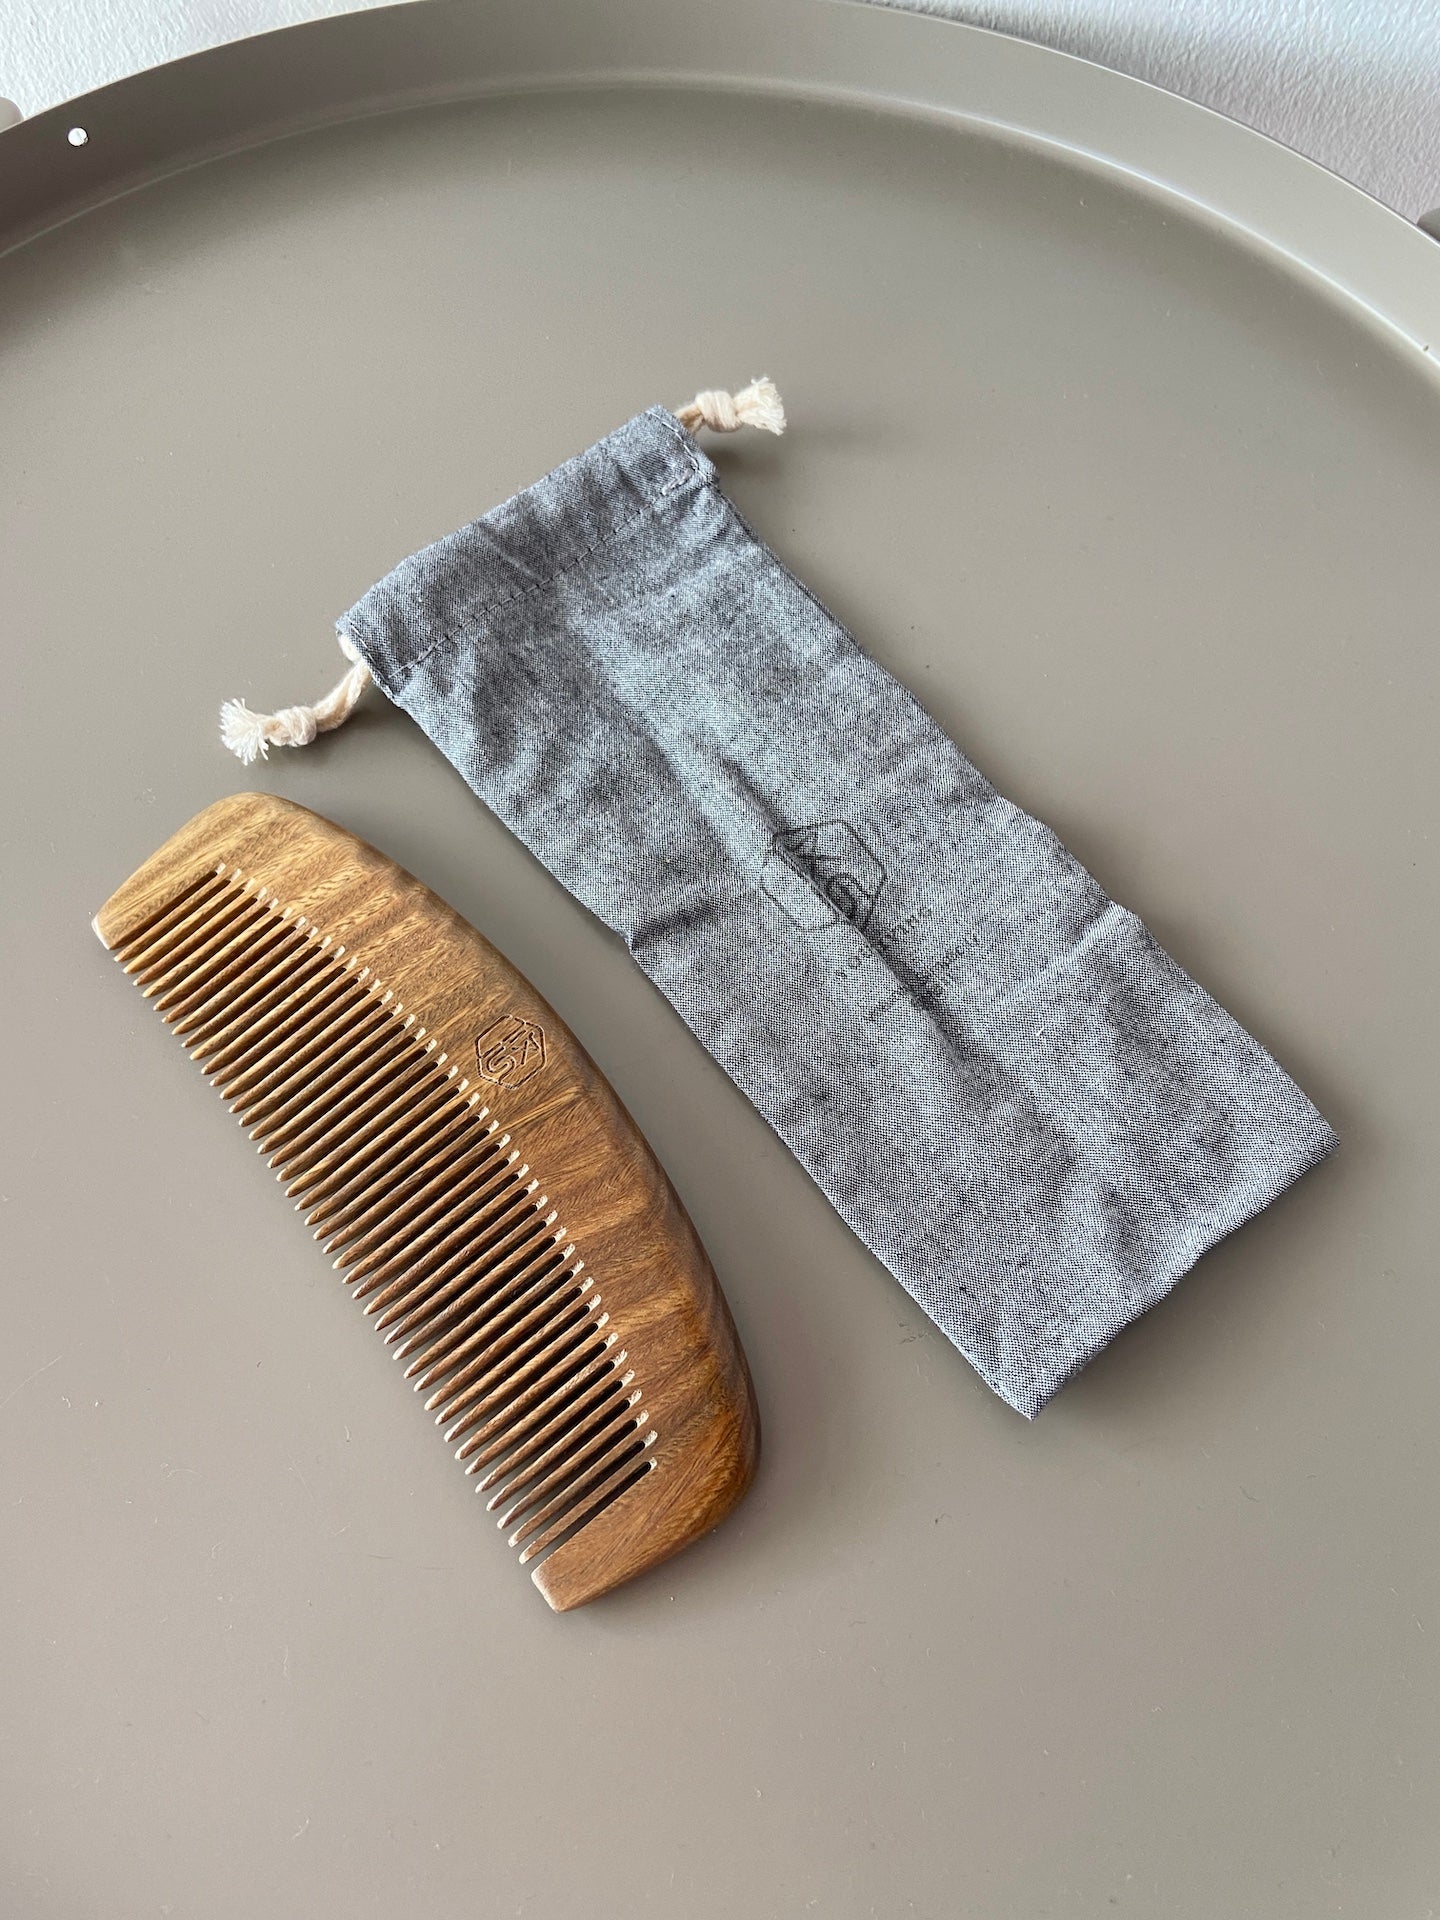 Handcrafted Verawood Comb (M)